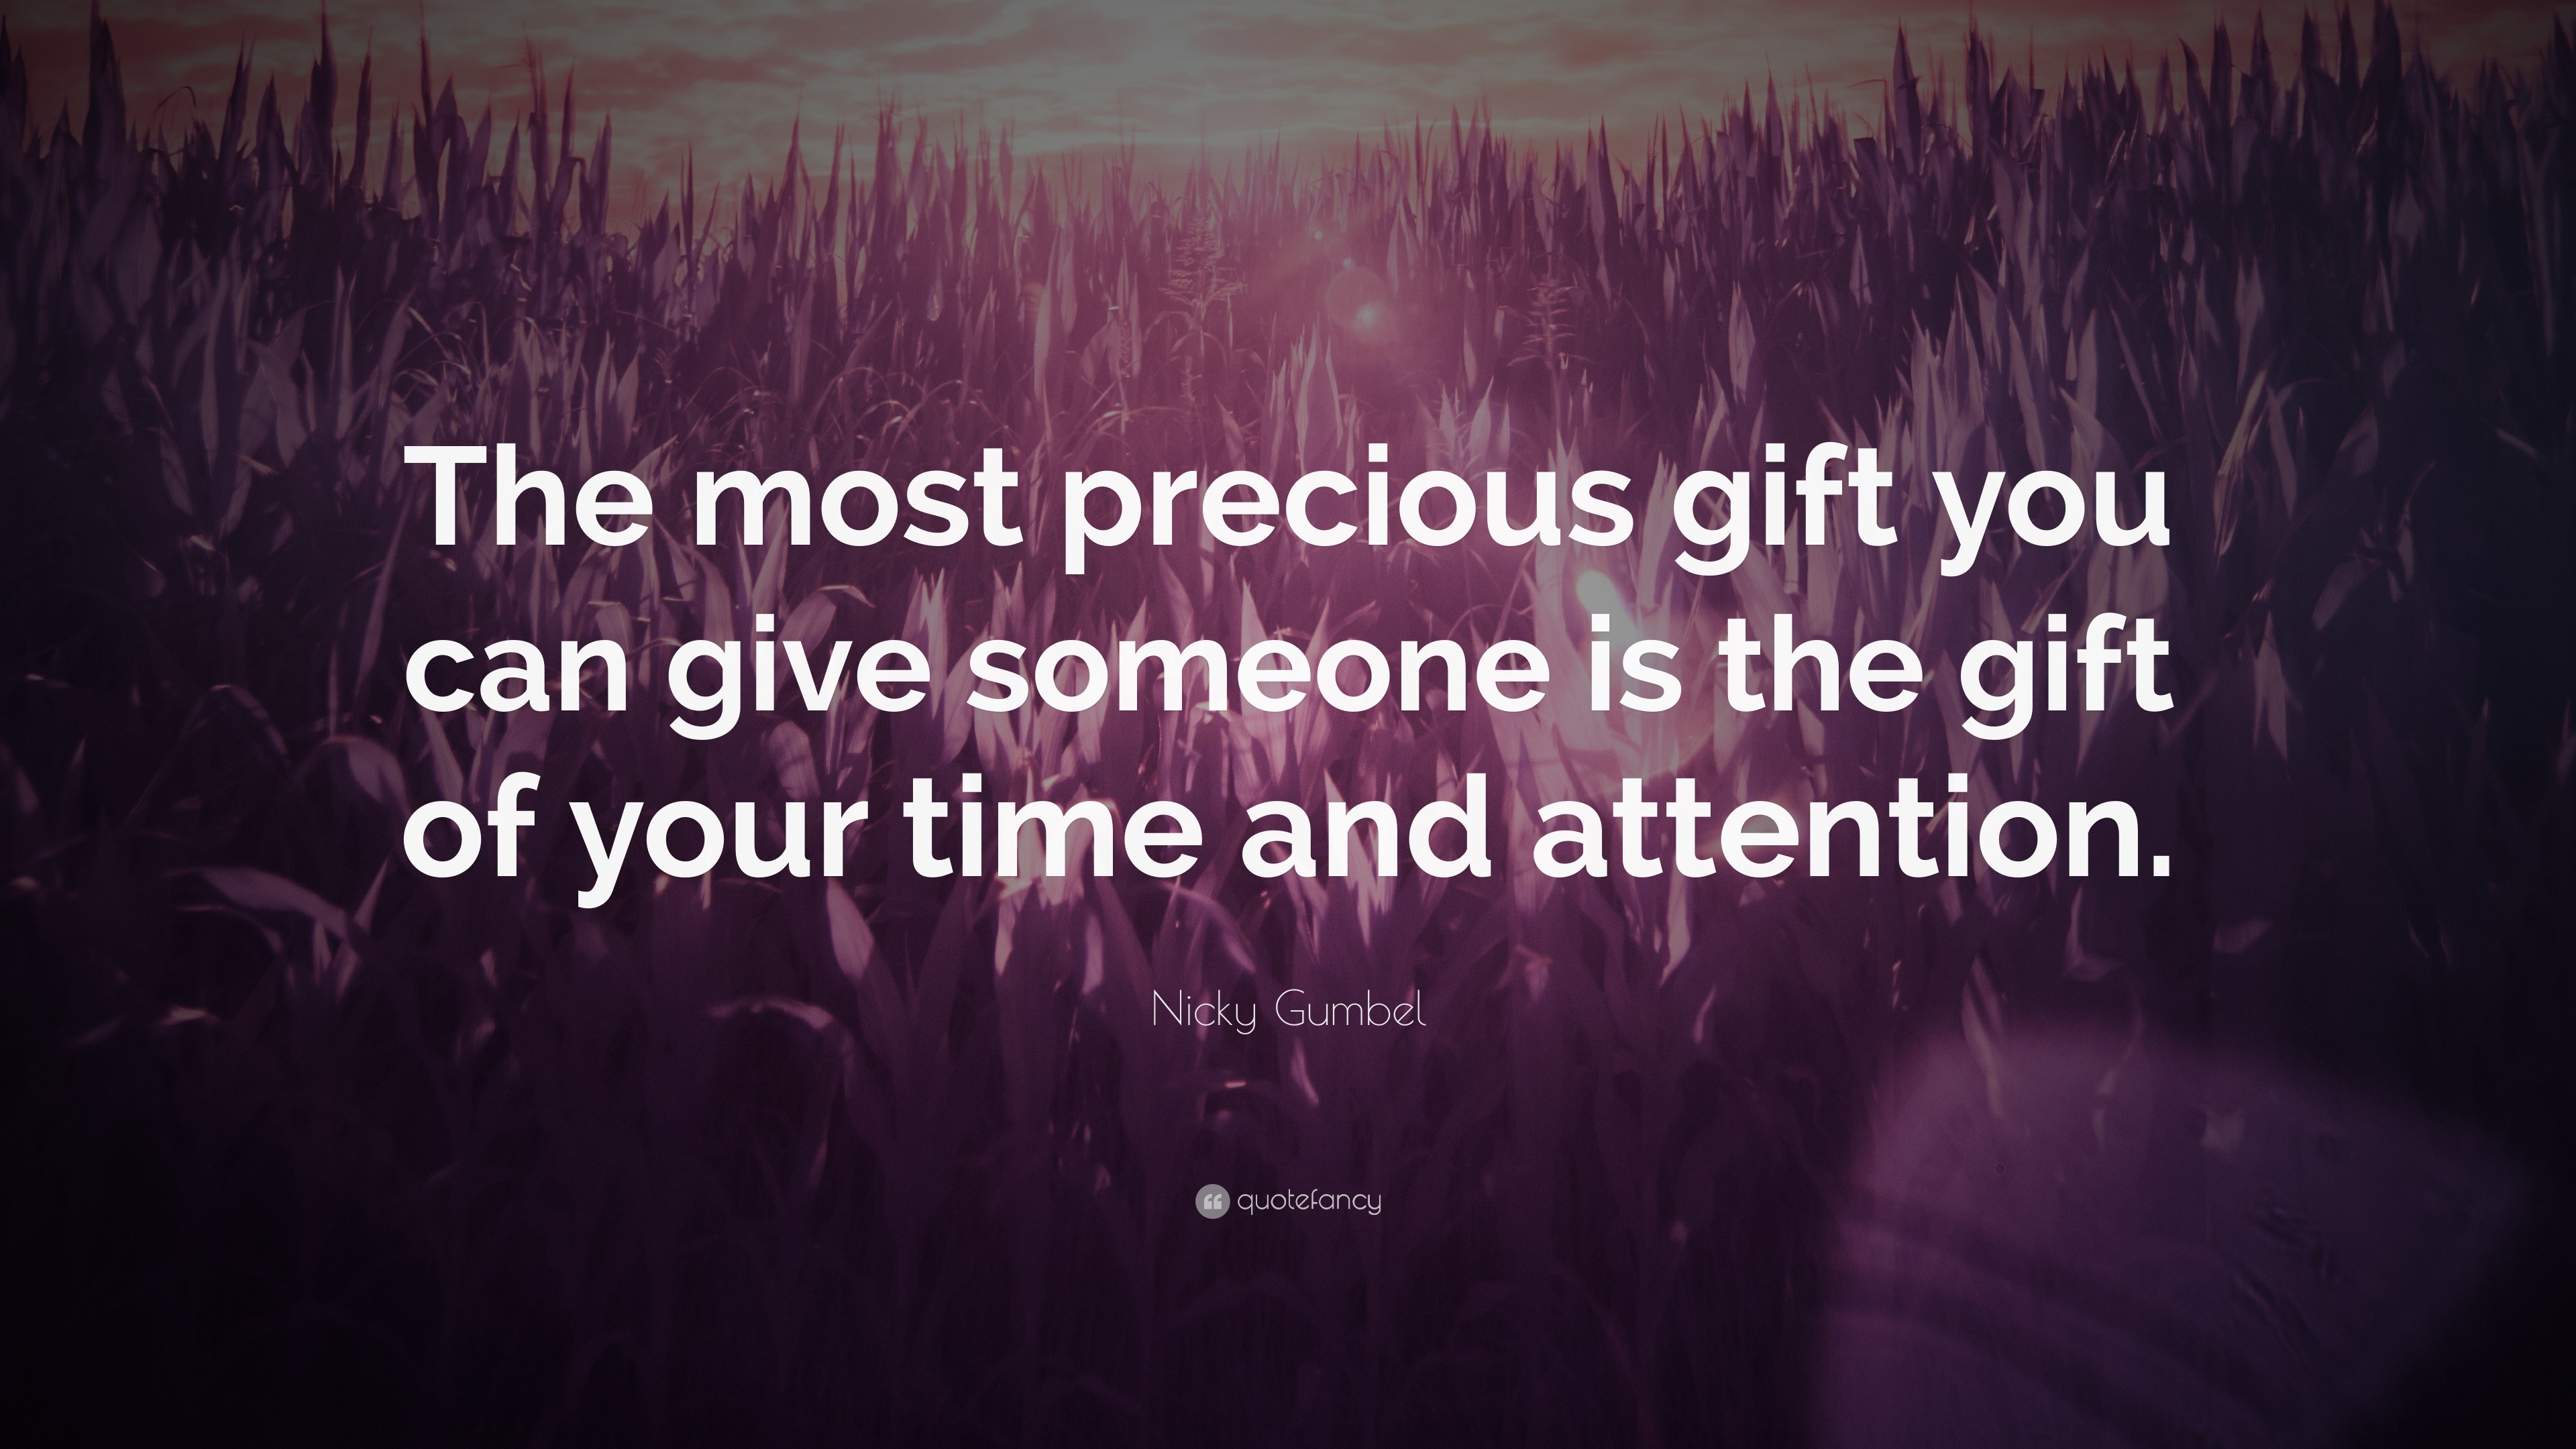 Nicky Gumbel Quote The Most Precious Gift You Can Give Someone Is The Gift Of Your Time And Attention 7 Wallpapers Quotefancy